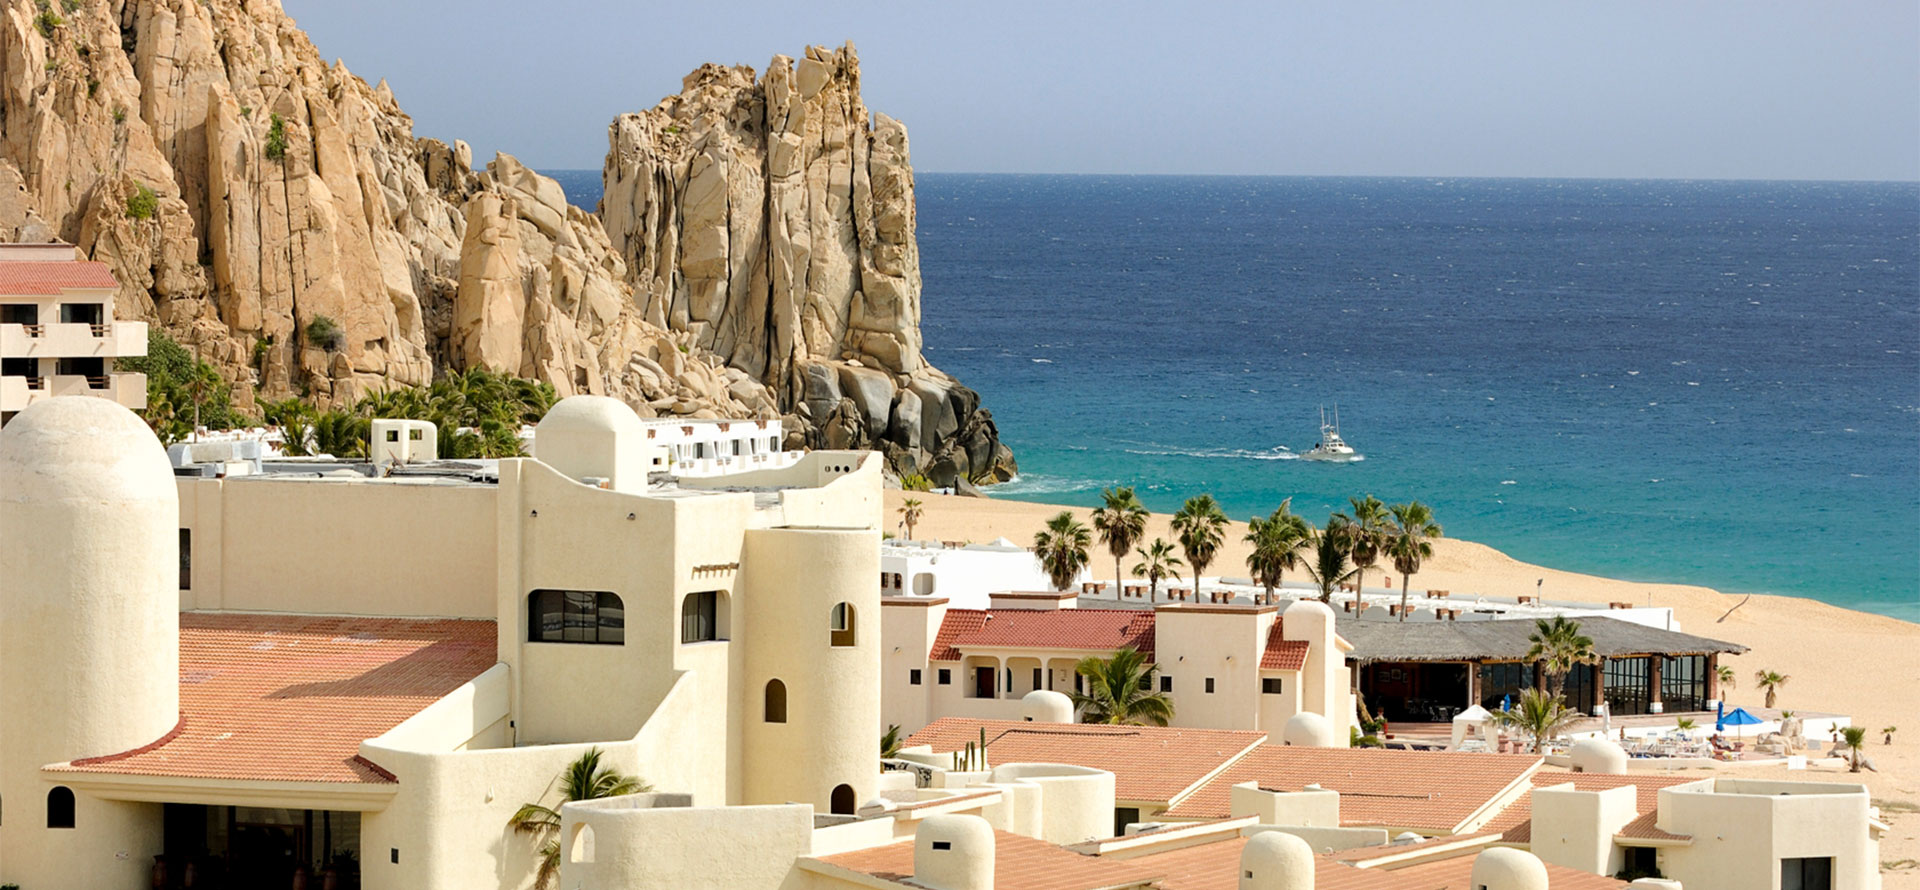 Cabo san lucas mexico adults only resort with beach.